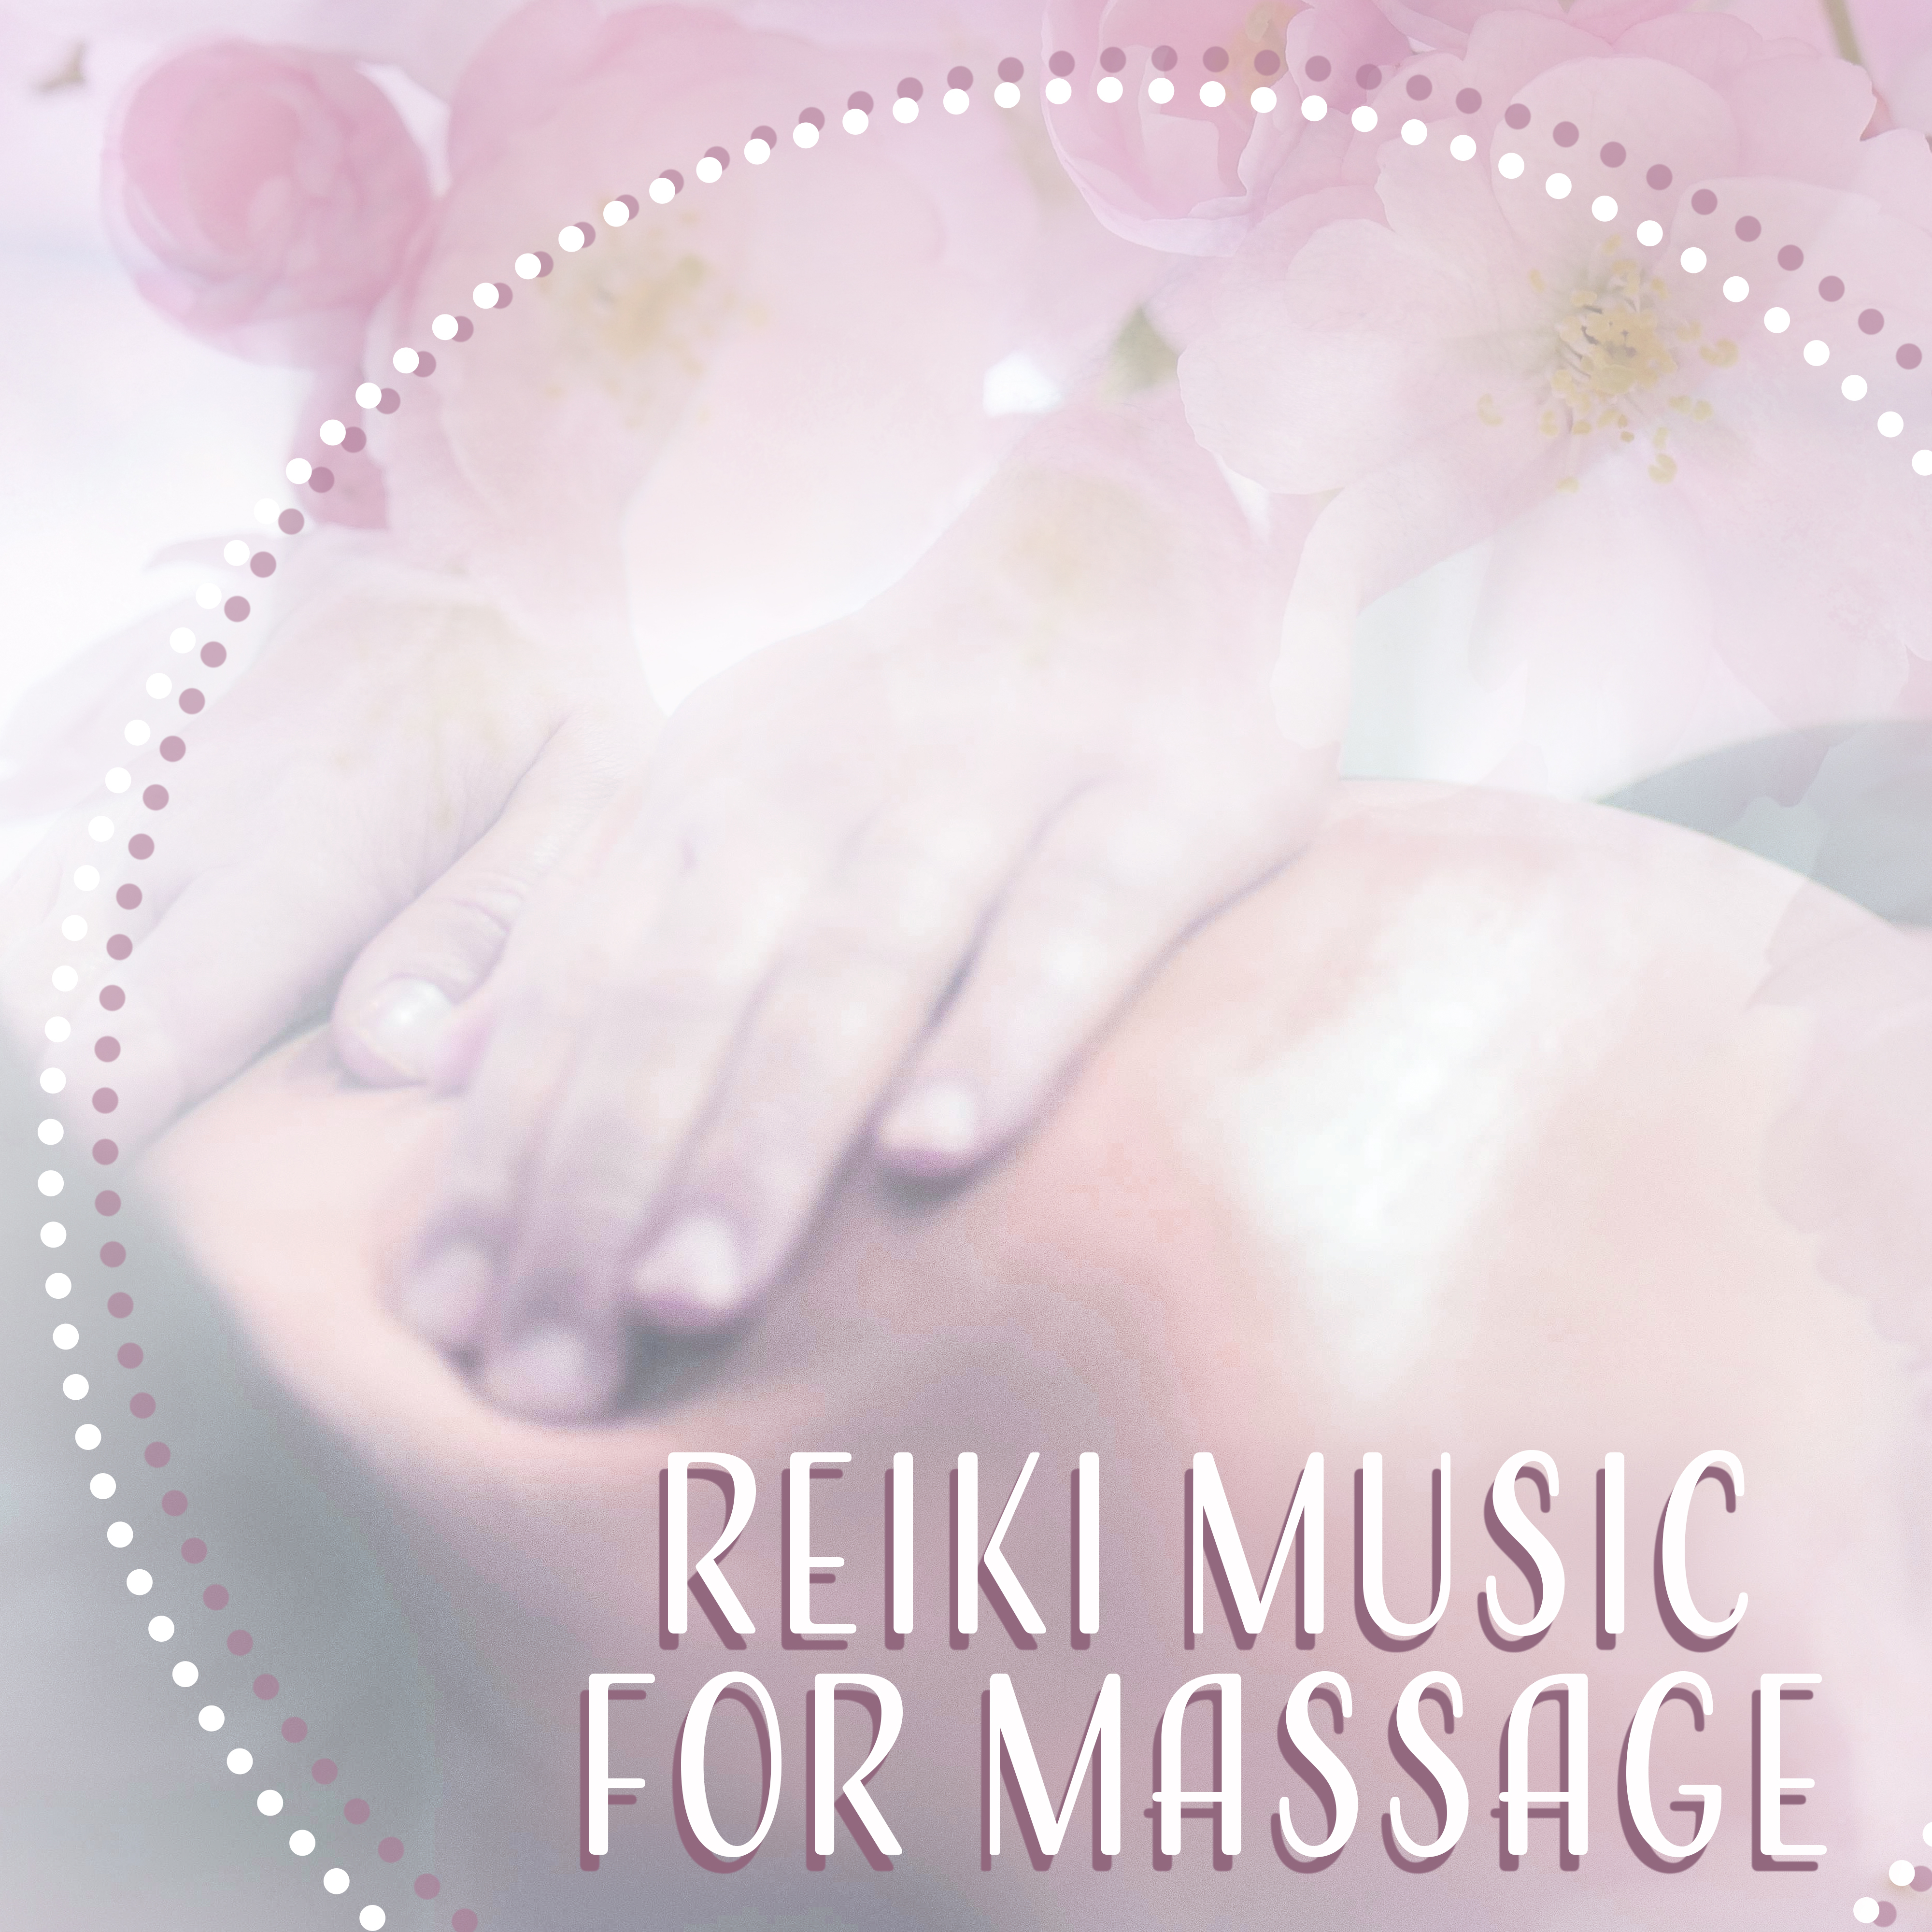 Reiki Music for Massage – Soft Sounds for Wellness, Spa Music, Healing Body, Asian Zen Spa, Relief, Calm Down, Stress Free, Peaceful Mind